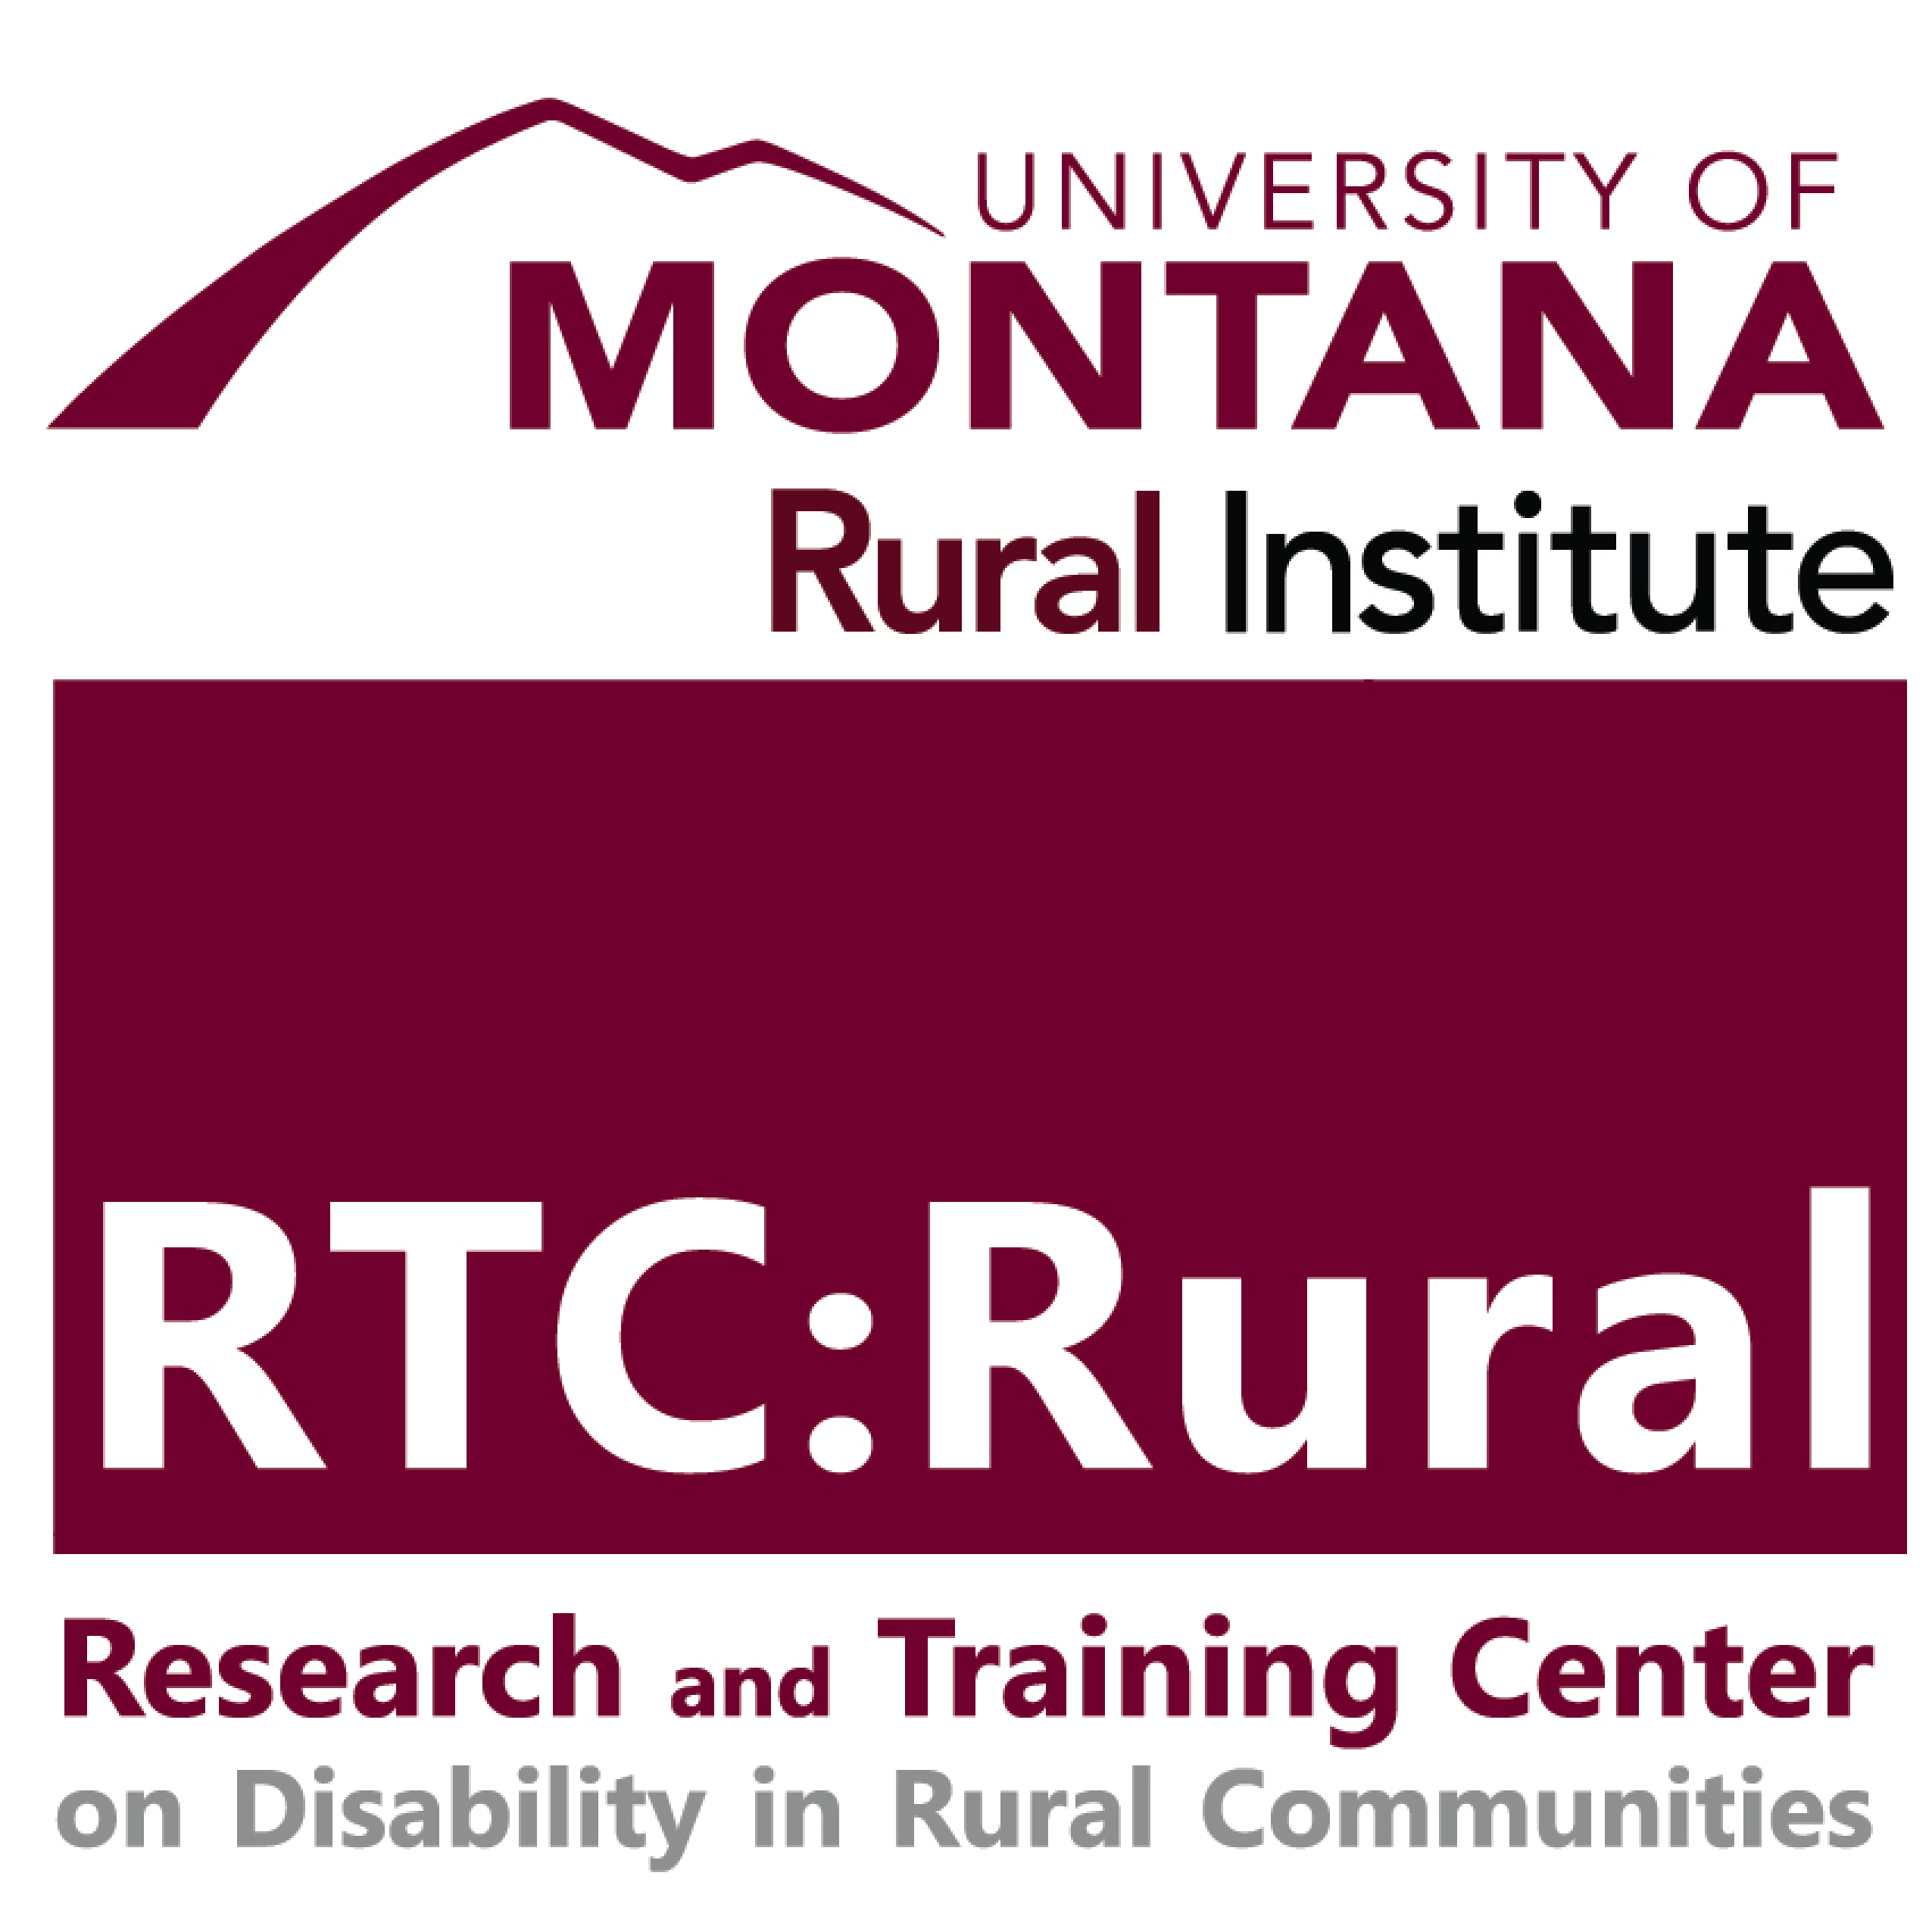 RTC Rural University of Montana Rural Institute Research and Training Center on Disability in Rural Communities